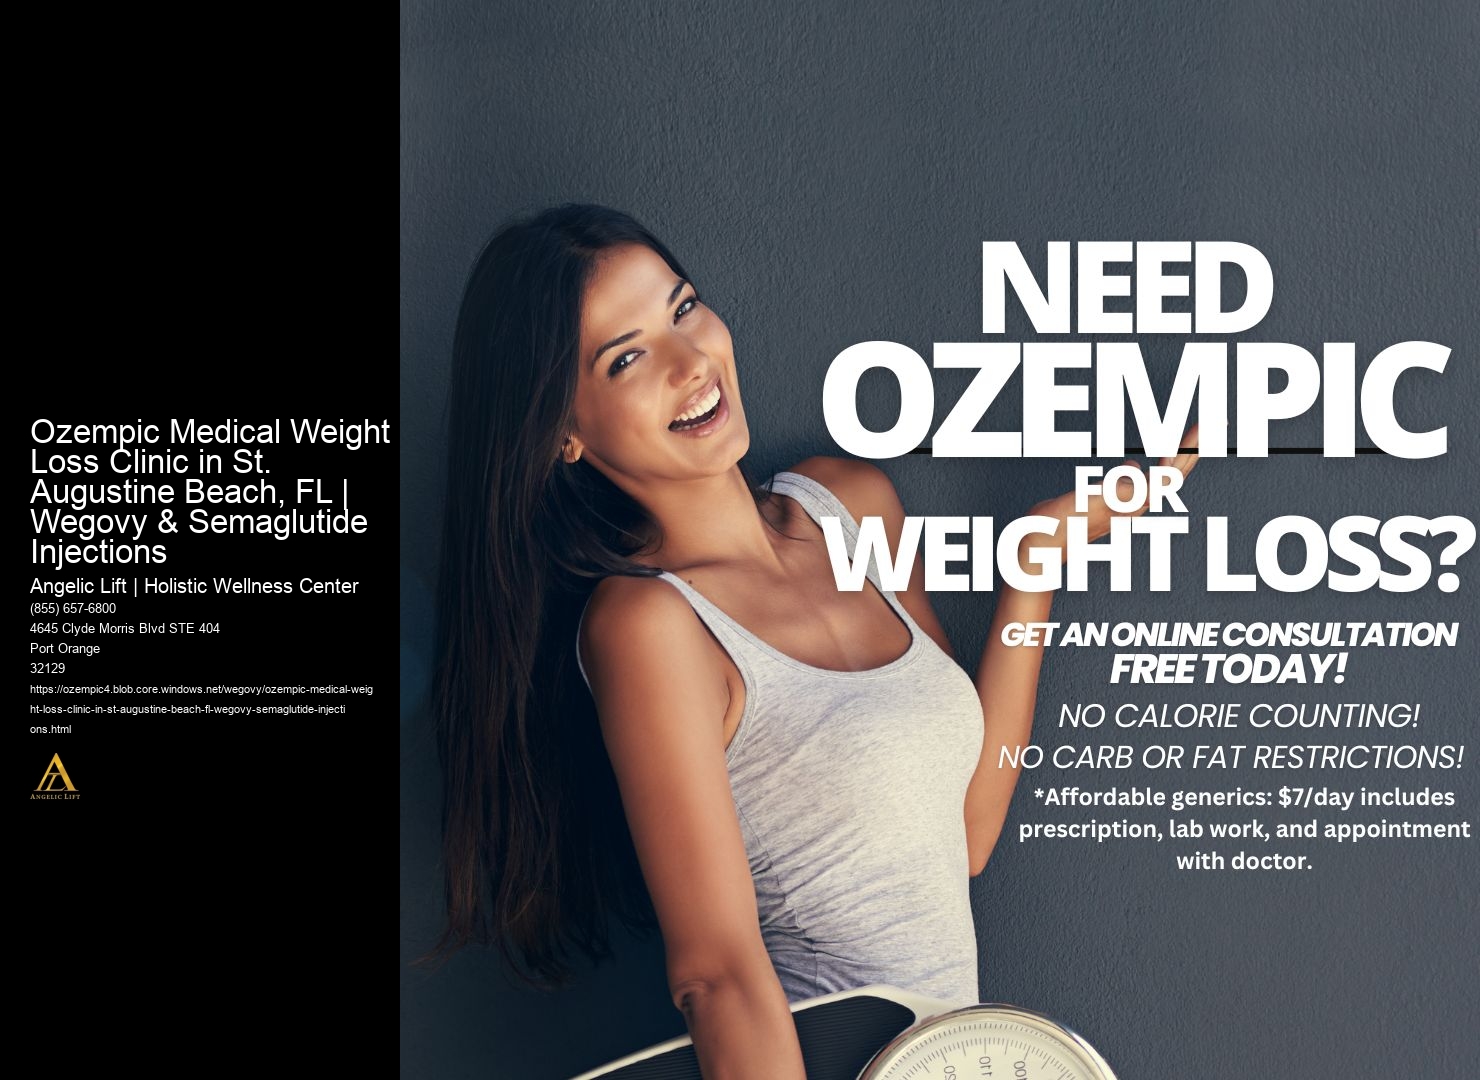 Ozempic Medical Weight Loss Clinic in St. Augustine Beach, FL | Wegovy & Semaglutide Injections